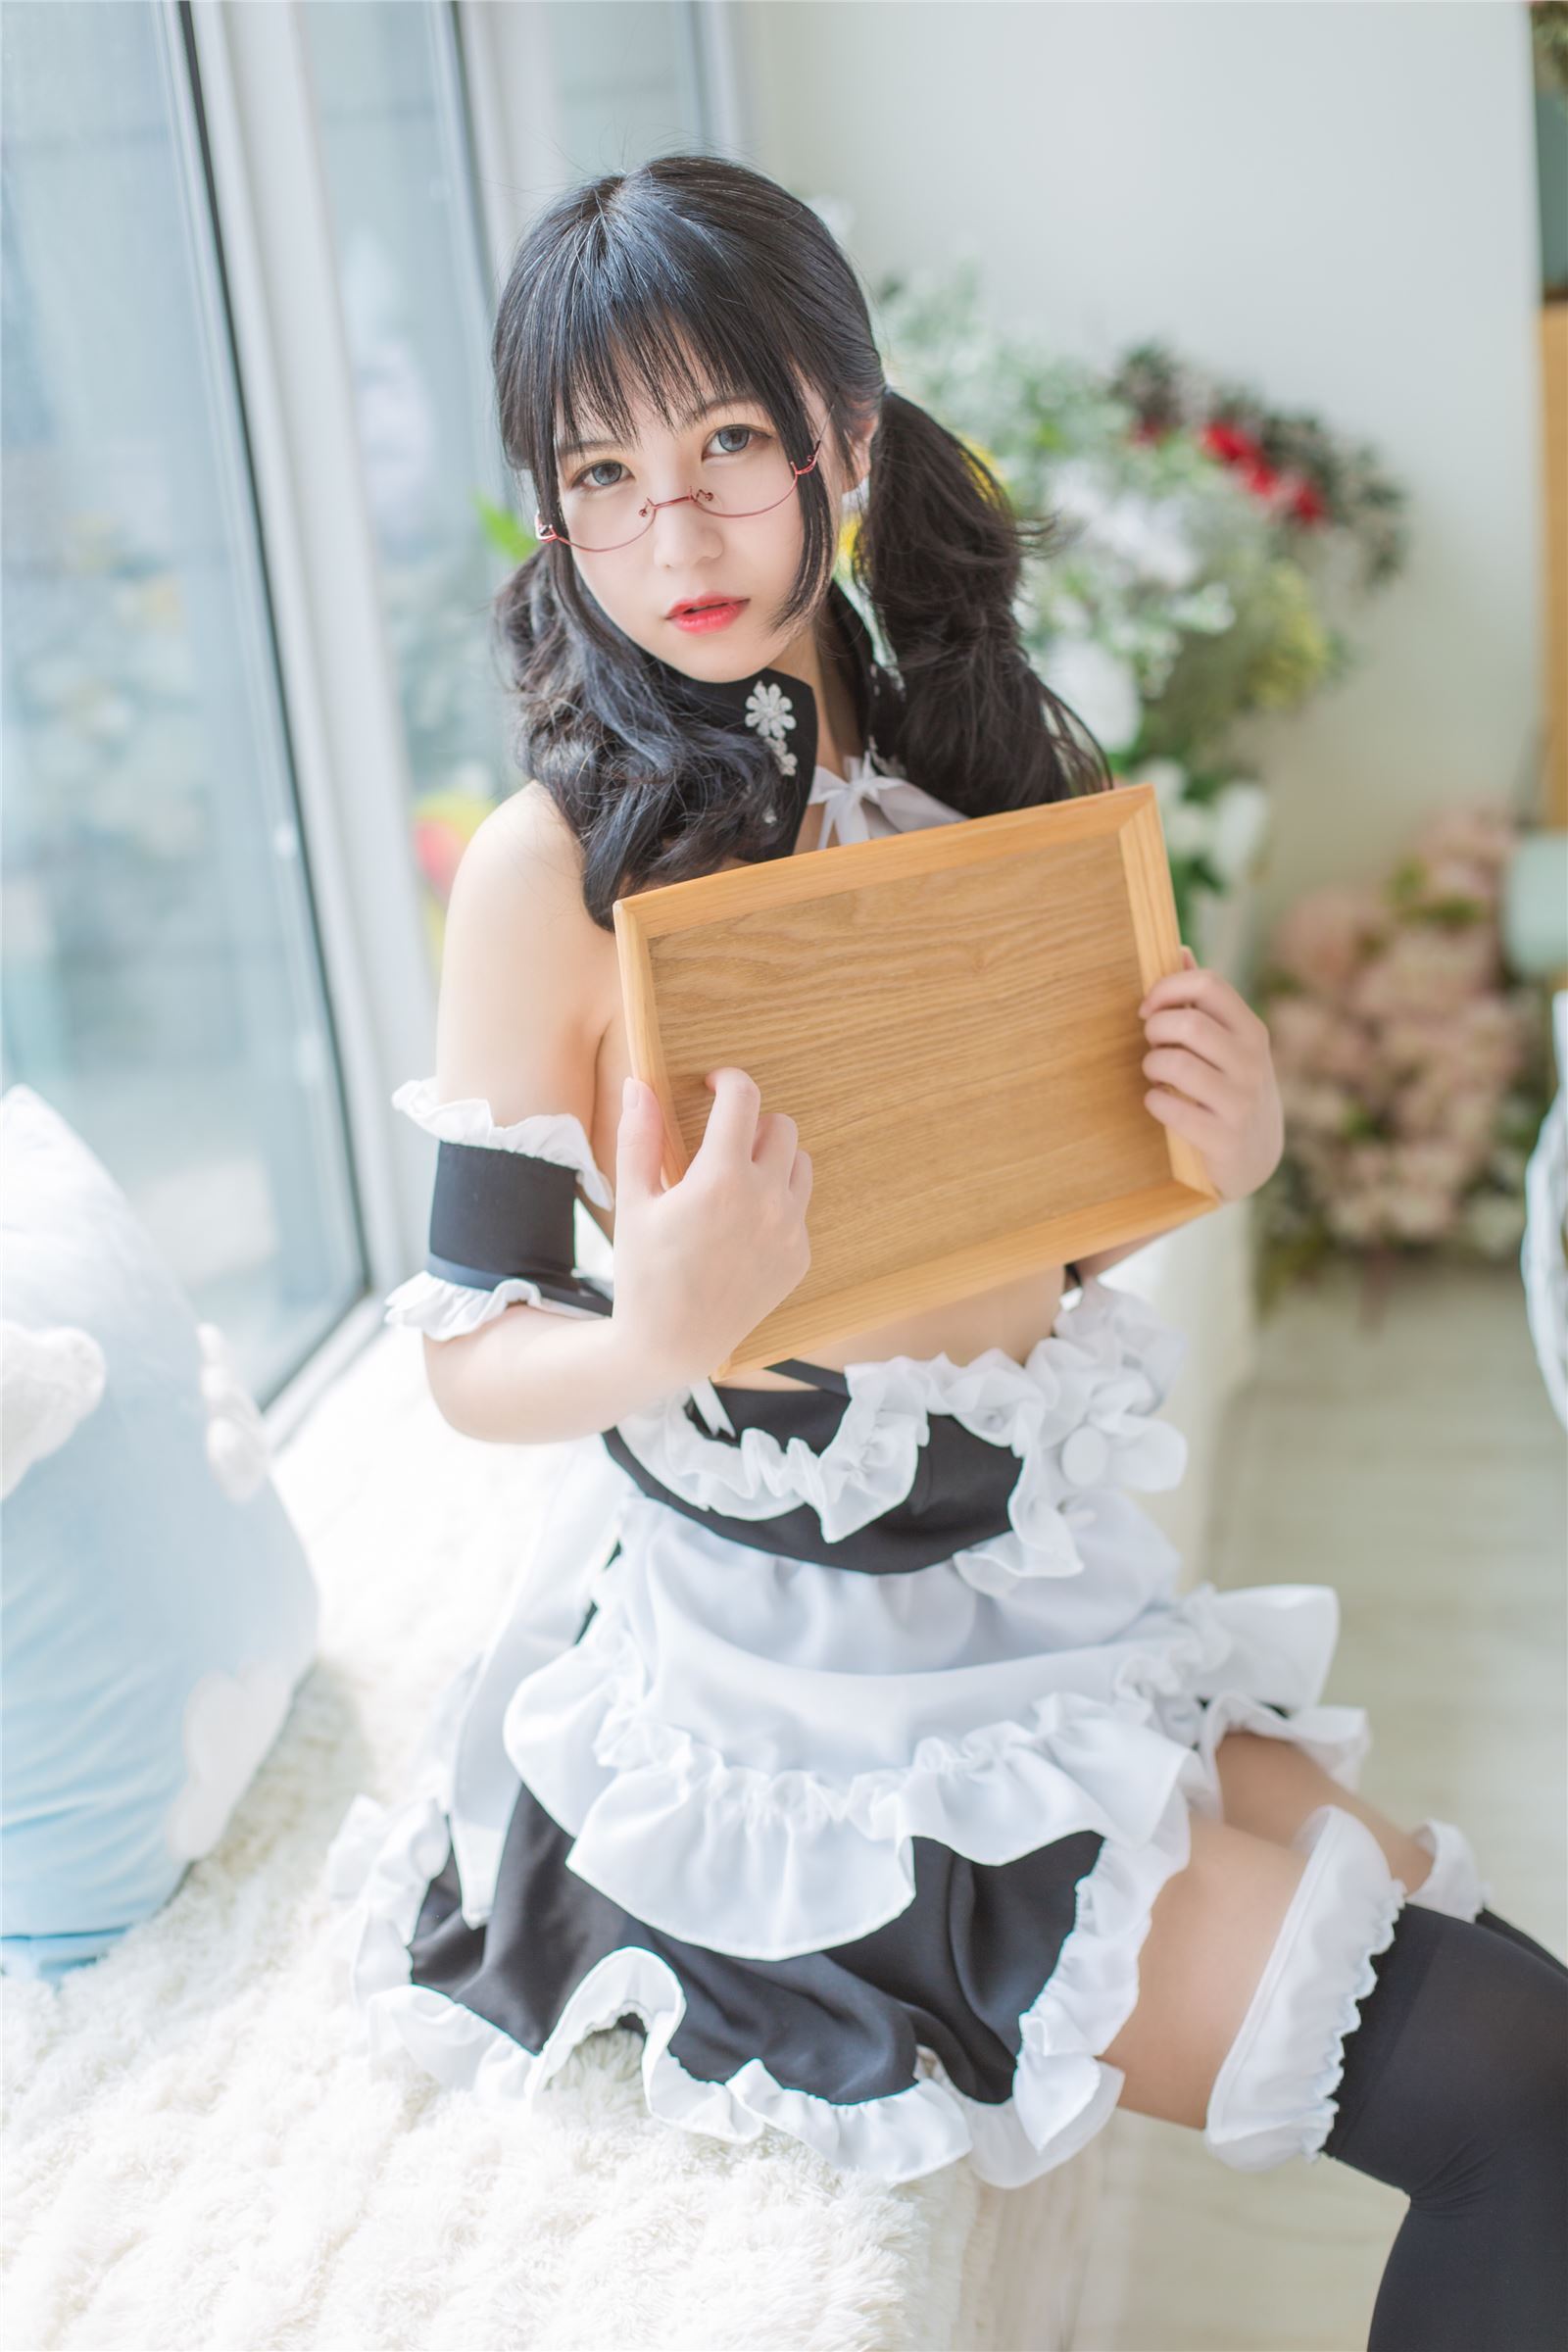 Monthly Su July latest photo final version maid